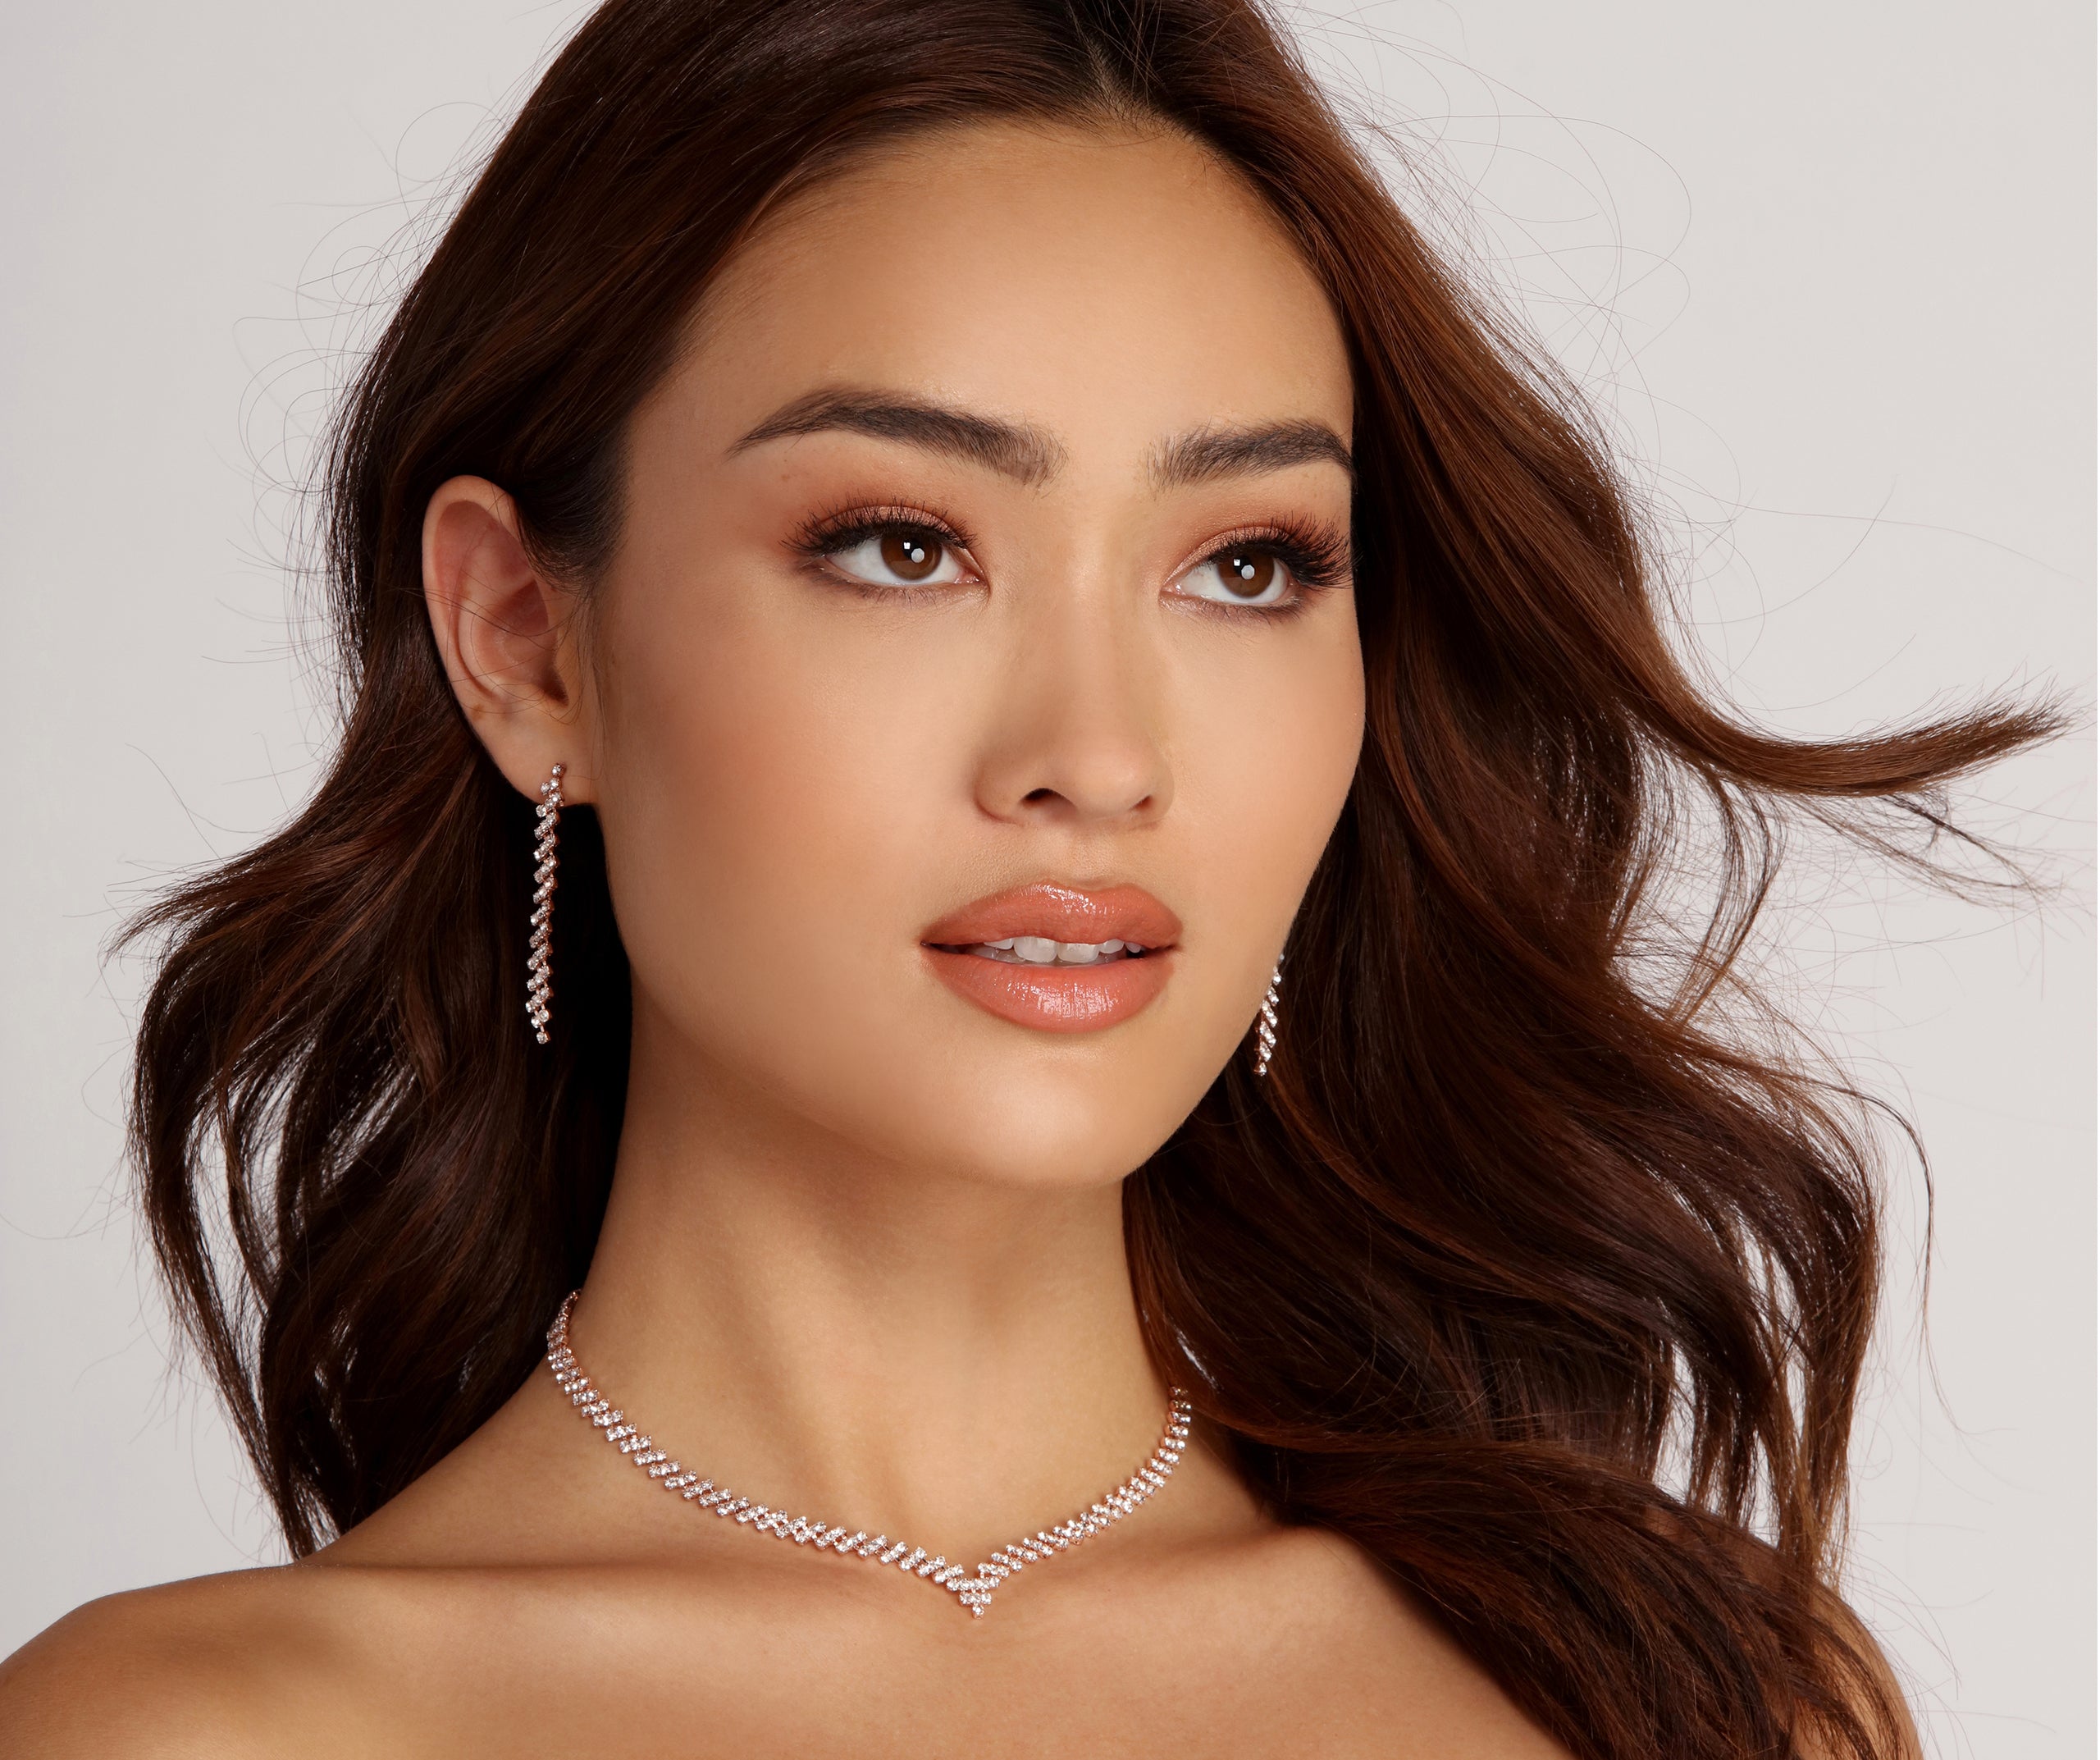 All In The Shine Necklace Set